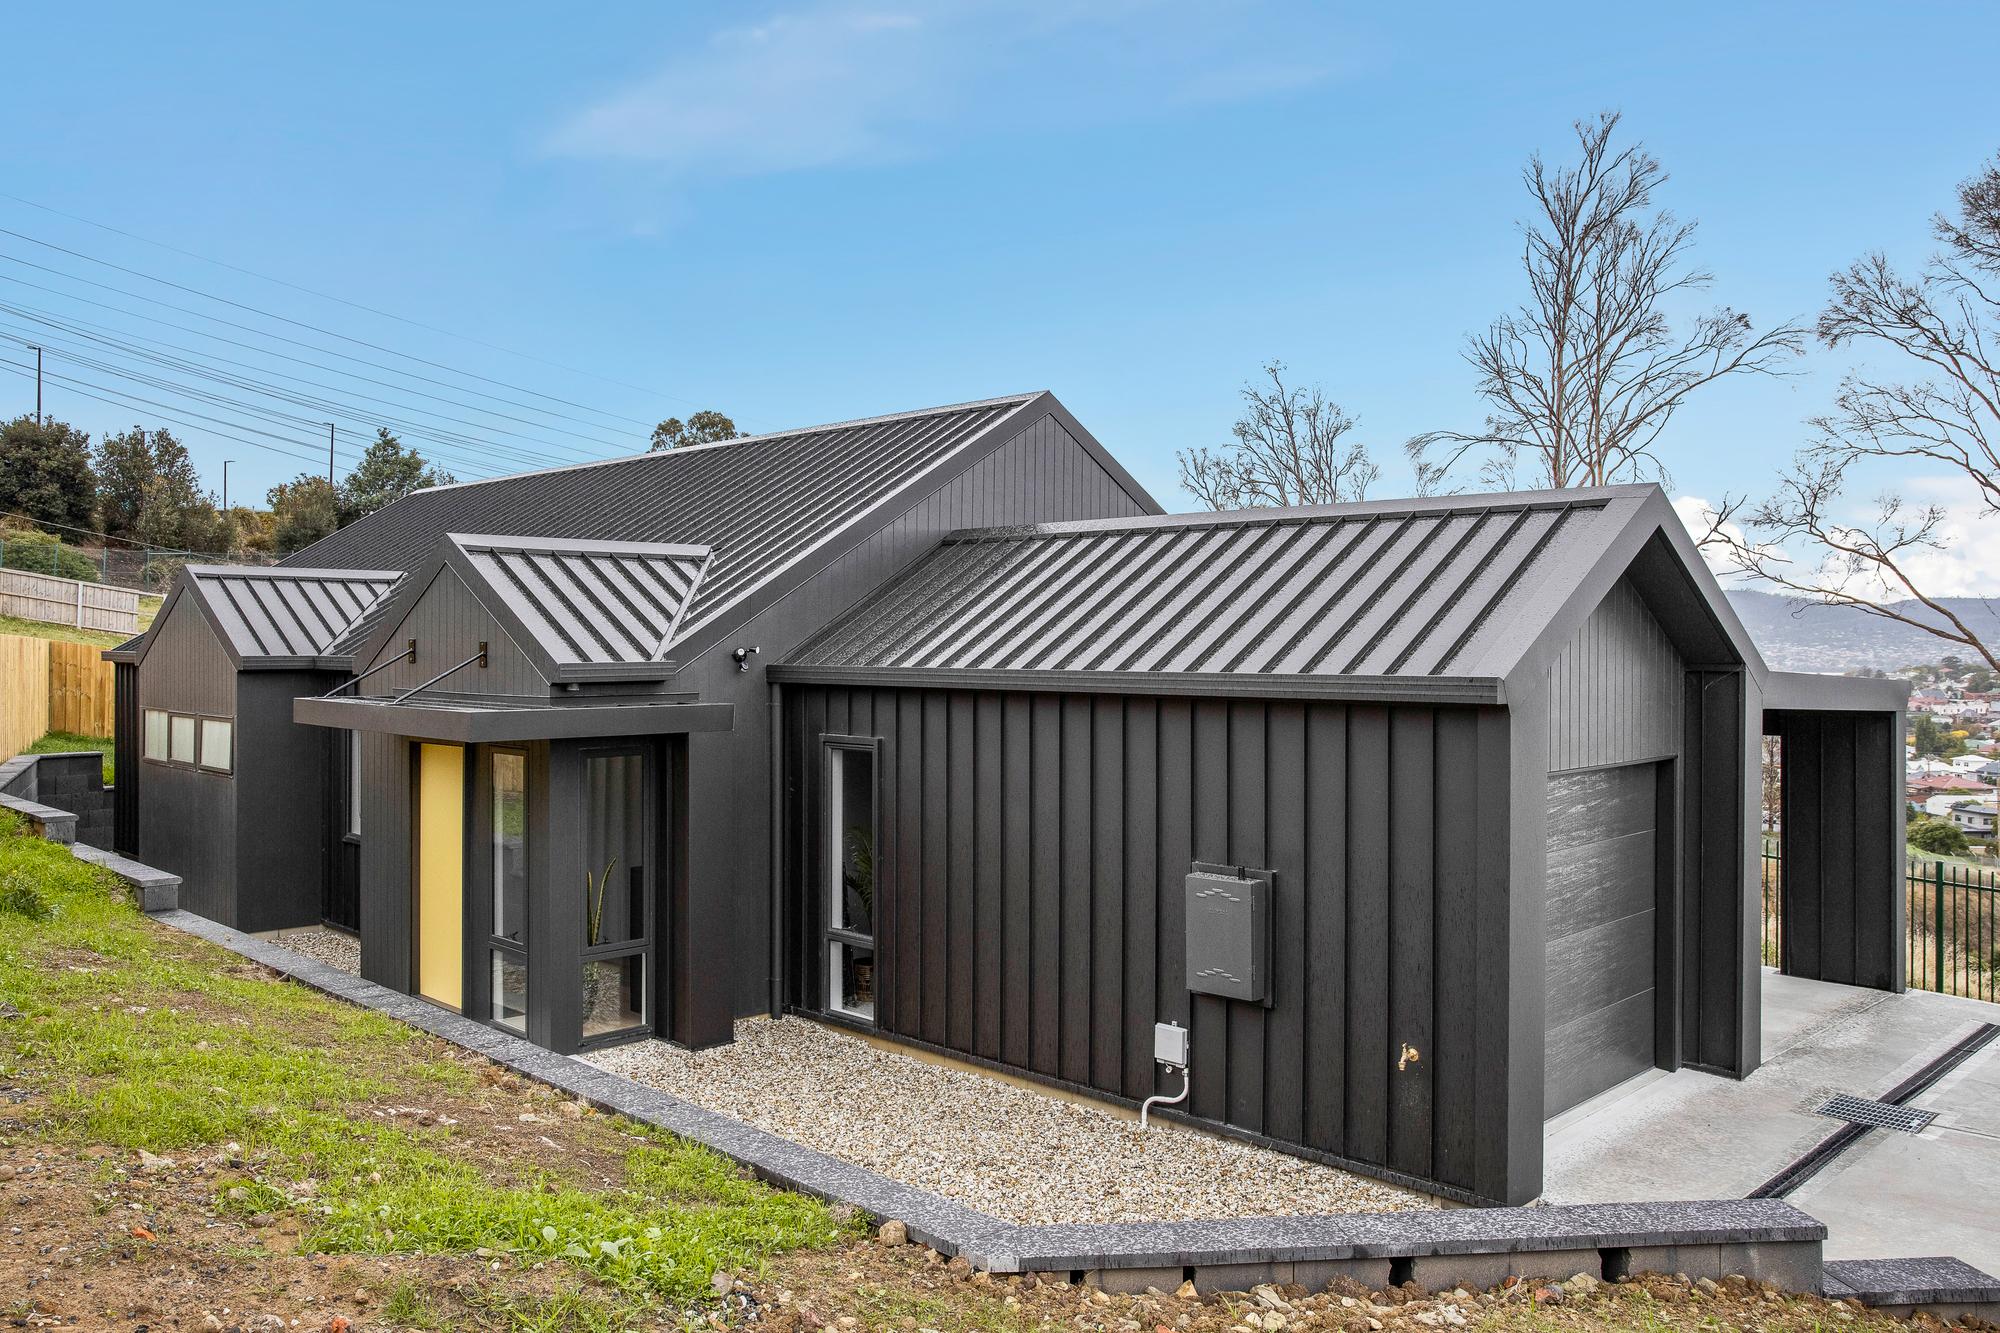 Louise from Glenorchy, TAS loves COLORBOND® steel. Roofing, Guttering & Fascia, Walling made from COLORBOND® steel in Monument® and Monument® Matt